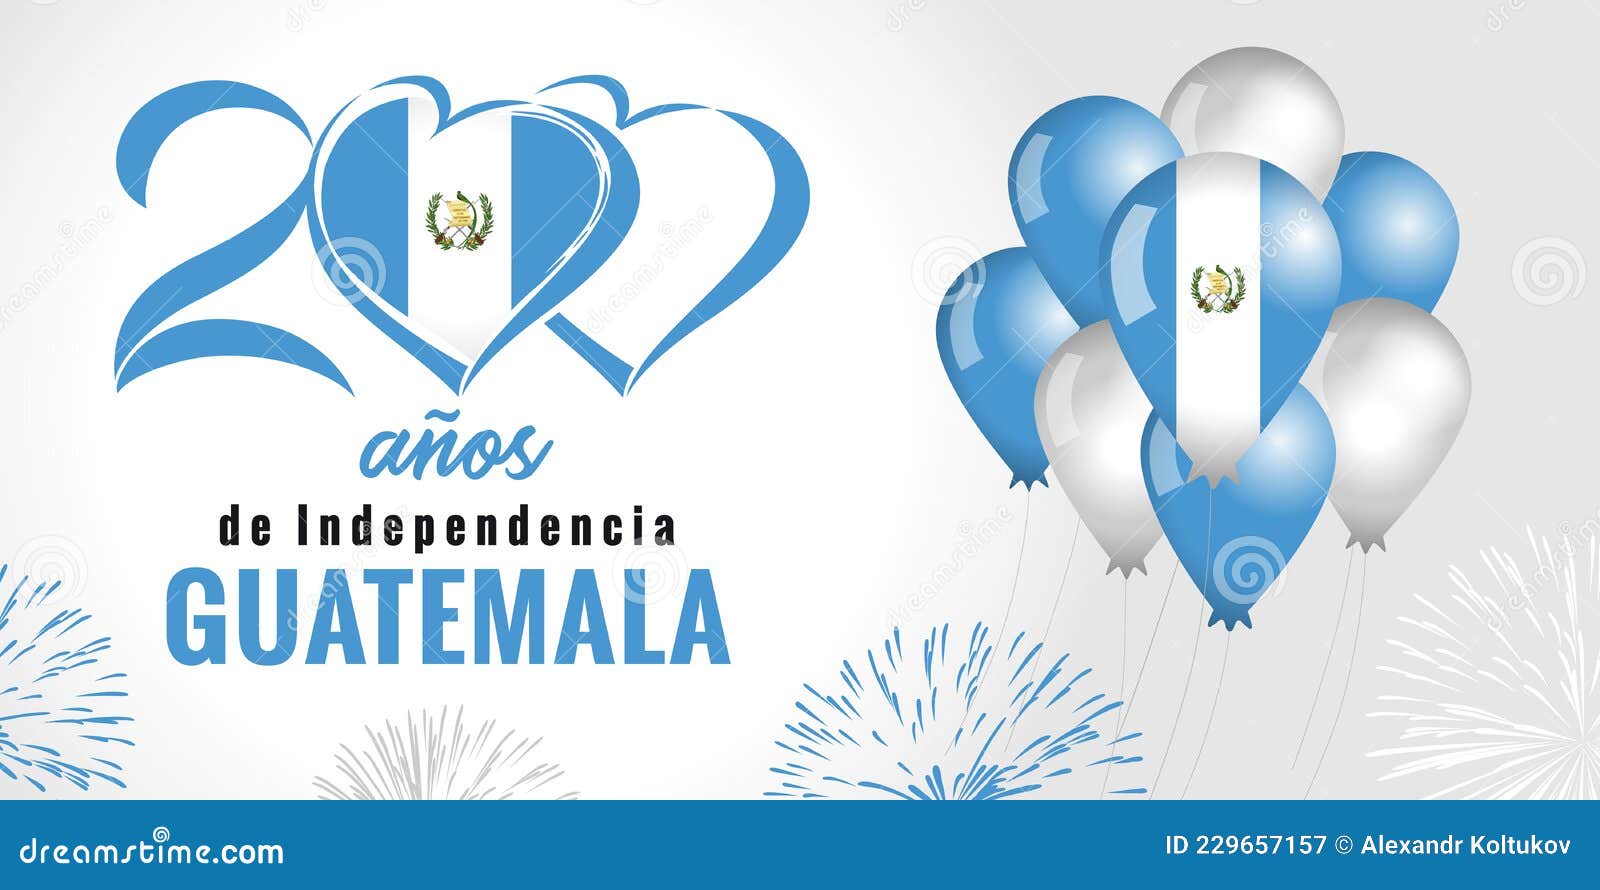 200 years anniversary  indepedencia guatemala balloons and fireworks